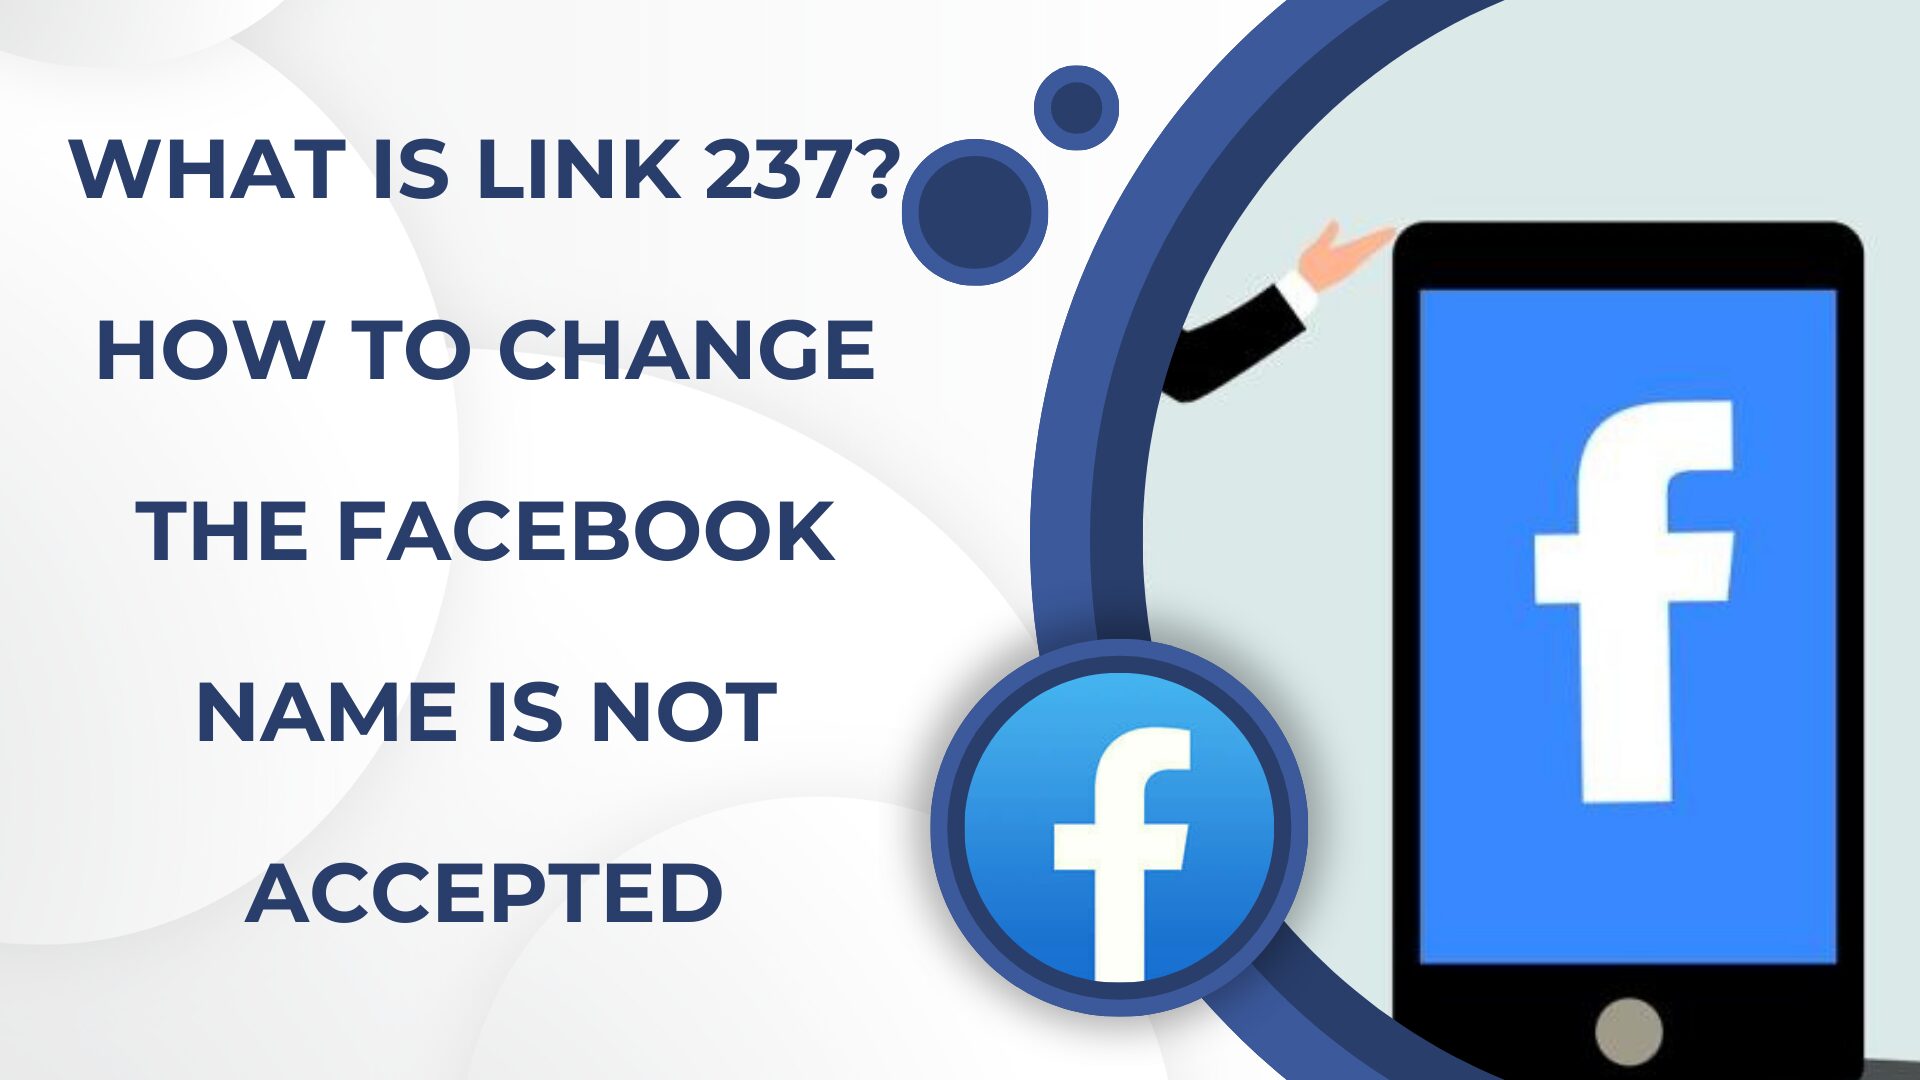 What is Link 237? How to change the Facebook name is not accepted